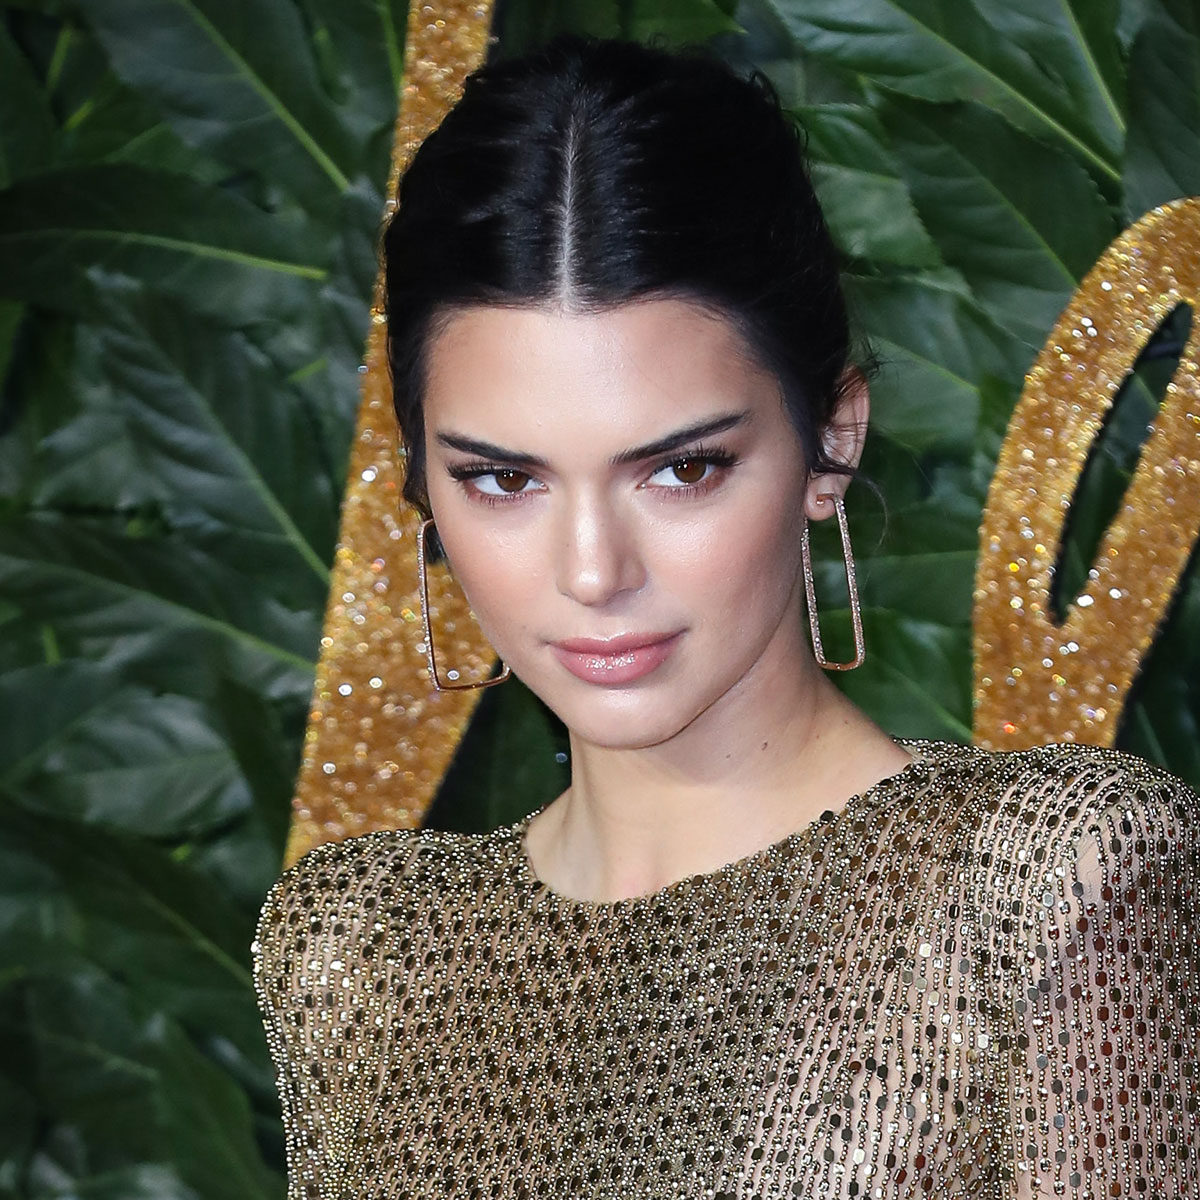 Kendall Jenner Rocks The 'No Pants' Trend Yet Again In Sheer